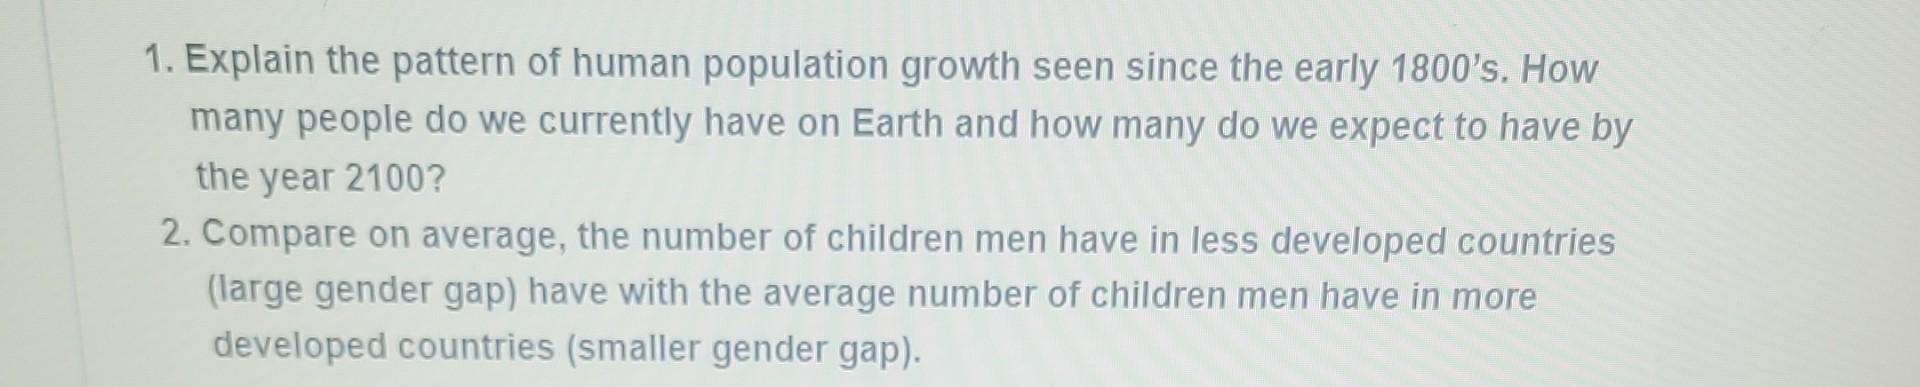 1. Explain the pattern of human population growth seen since the early 1800's. How many people do we